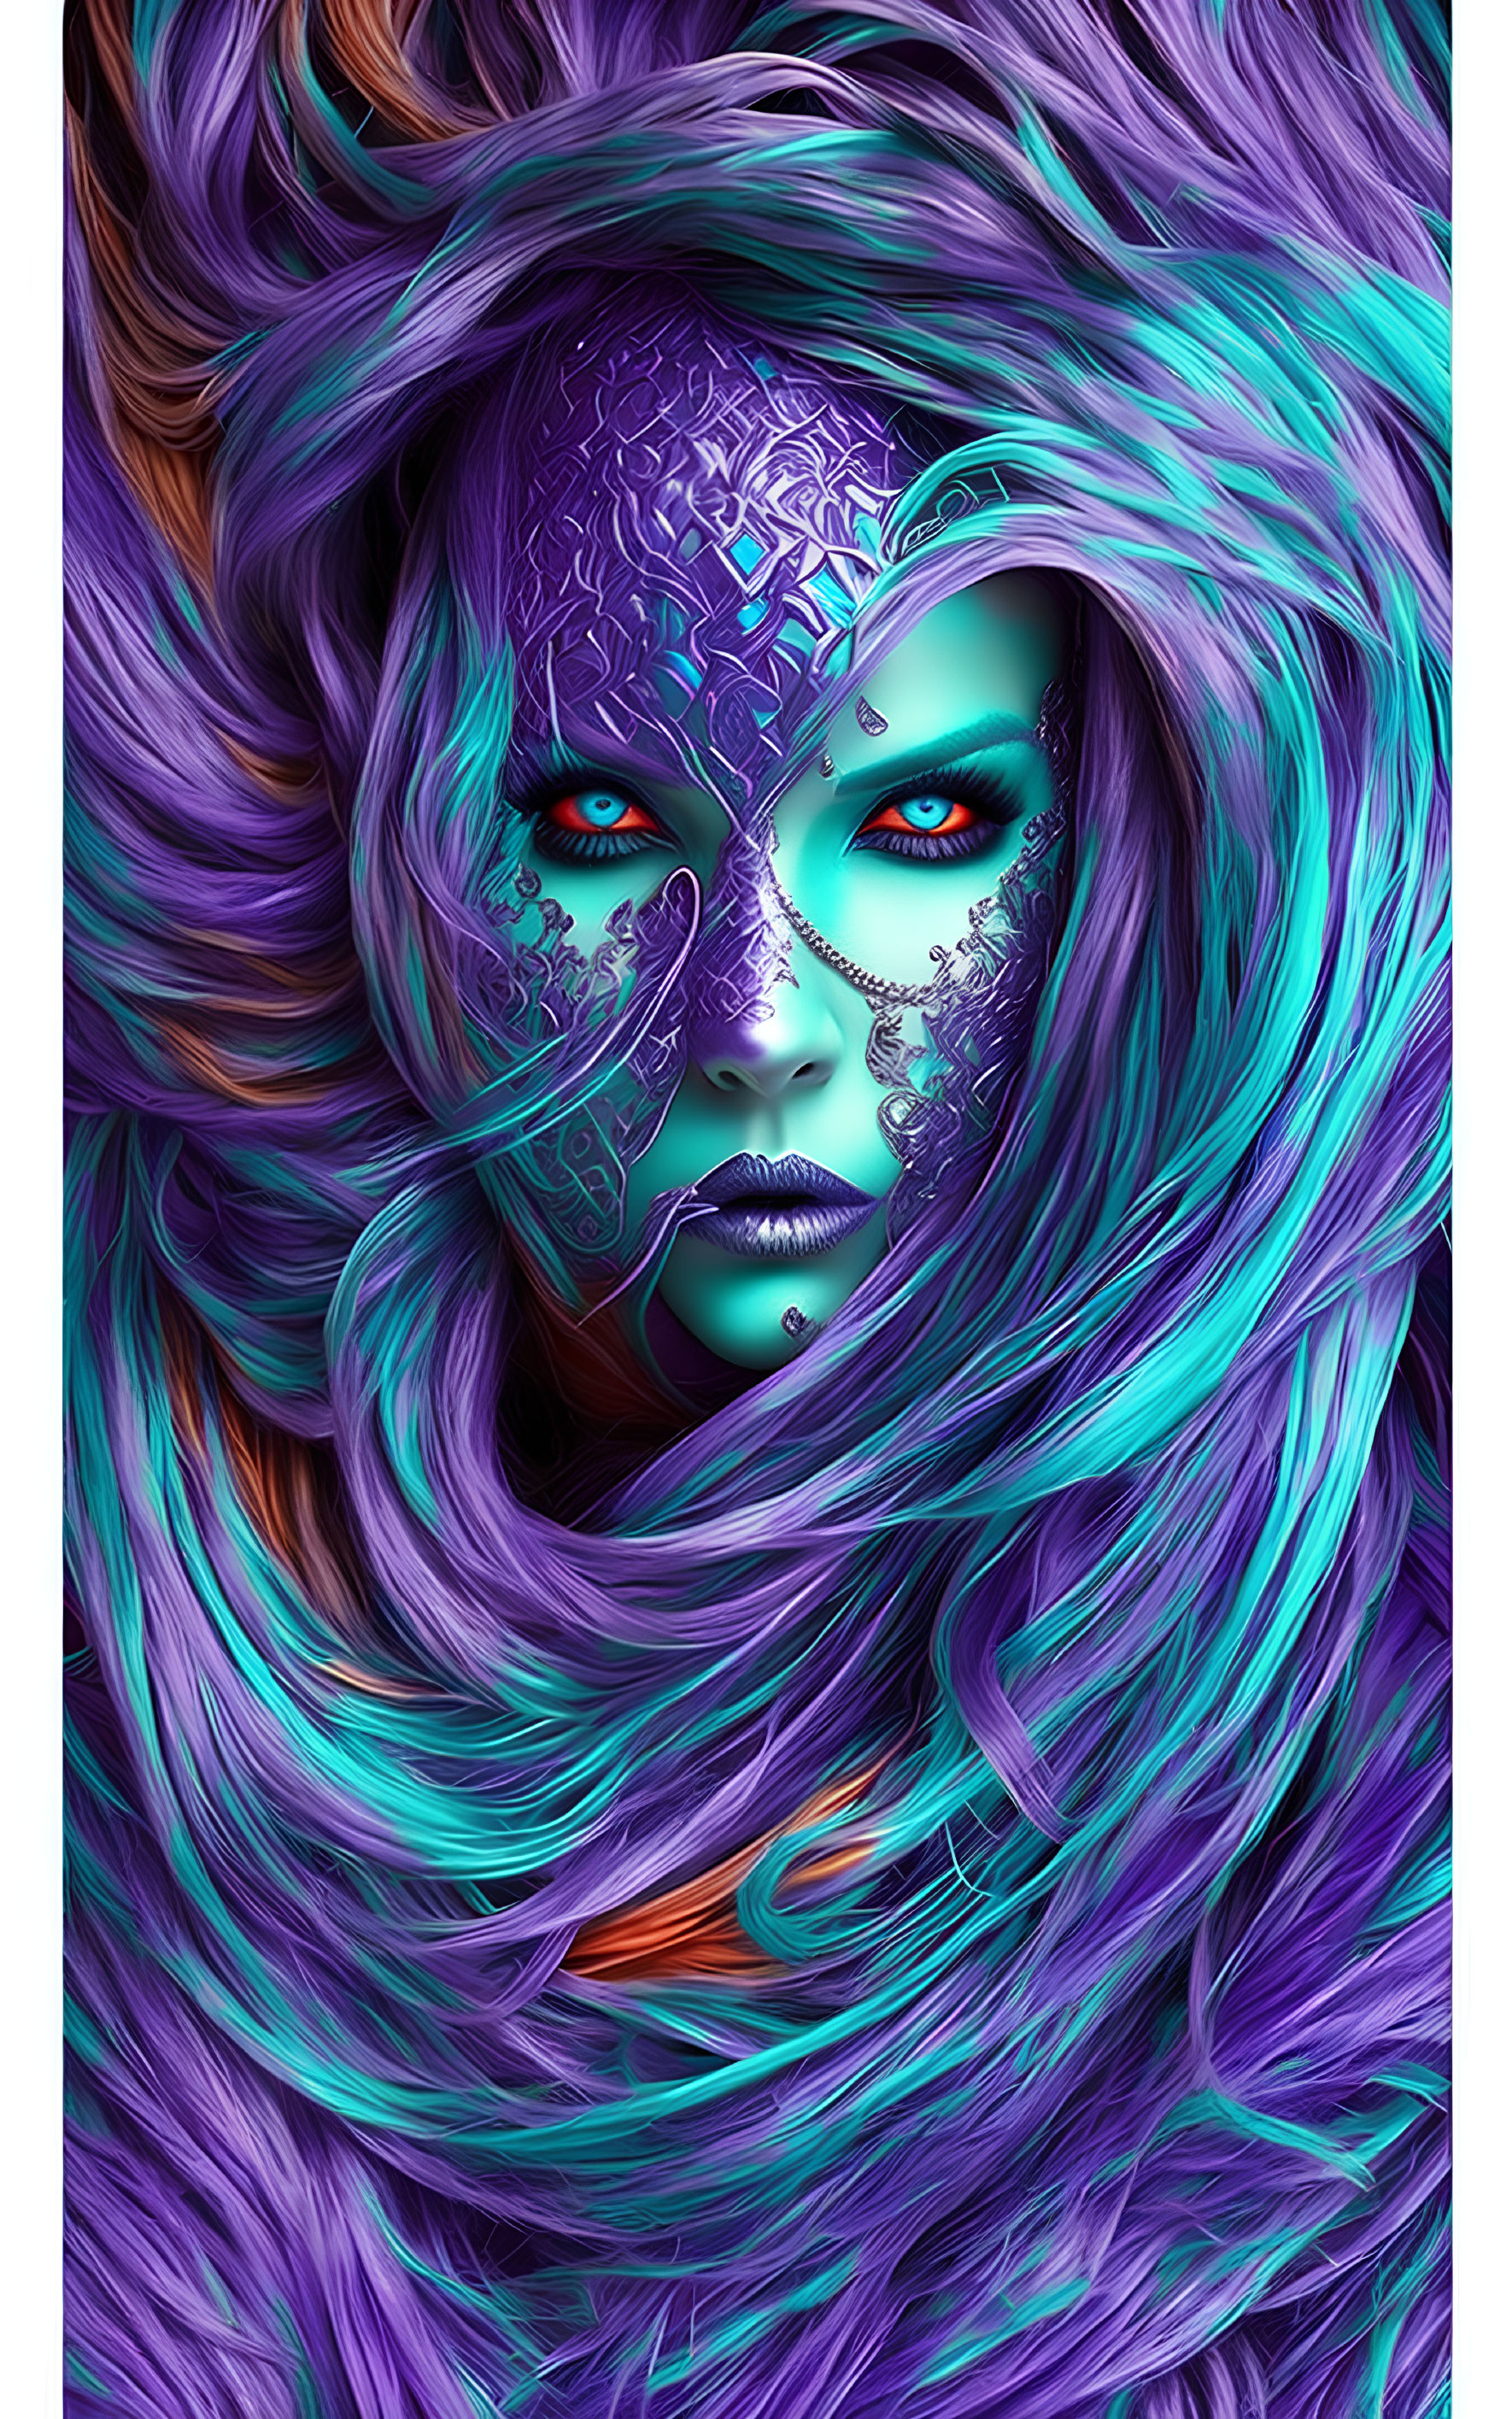 Vibrant purple hair and blue skin on mystical woman with intricate facial markings